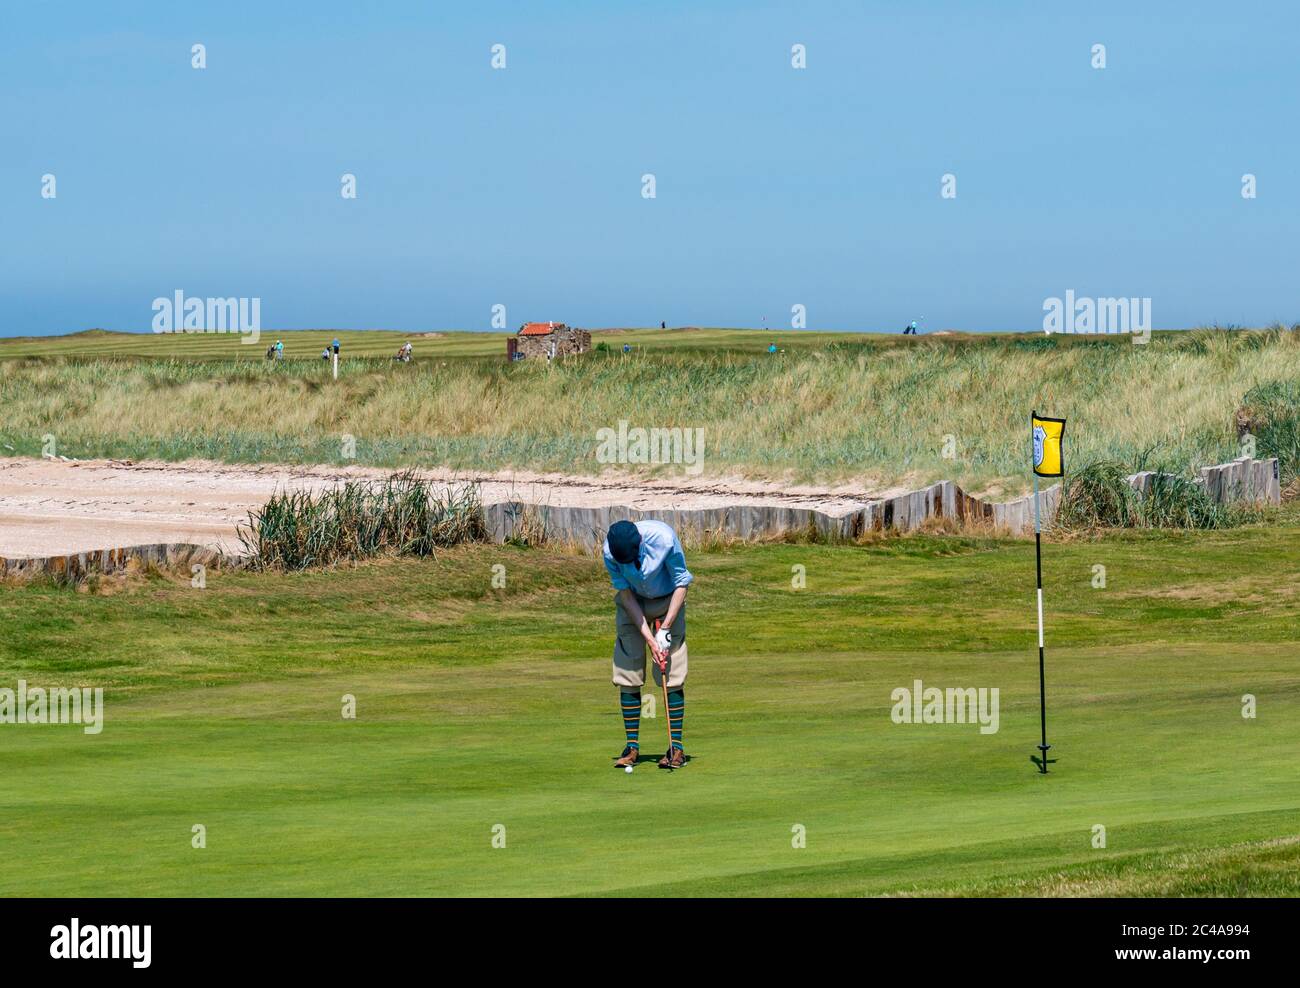 Aberlady, East Lothian, Scotland, United Kingdom, 25th June 2020. UK Weather: hot sunshine in Craigielaw golf course with a man dressed in plus fours on a putting green Stock Photo